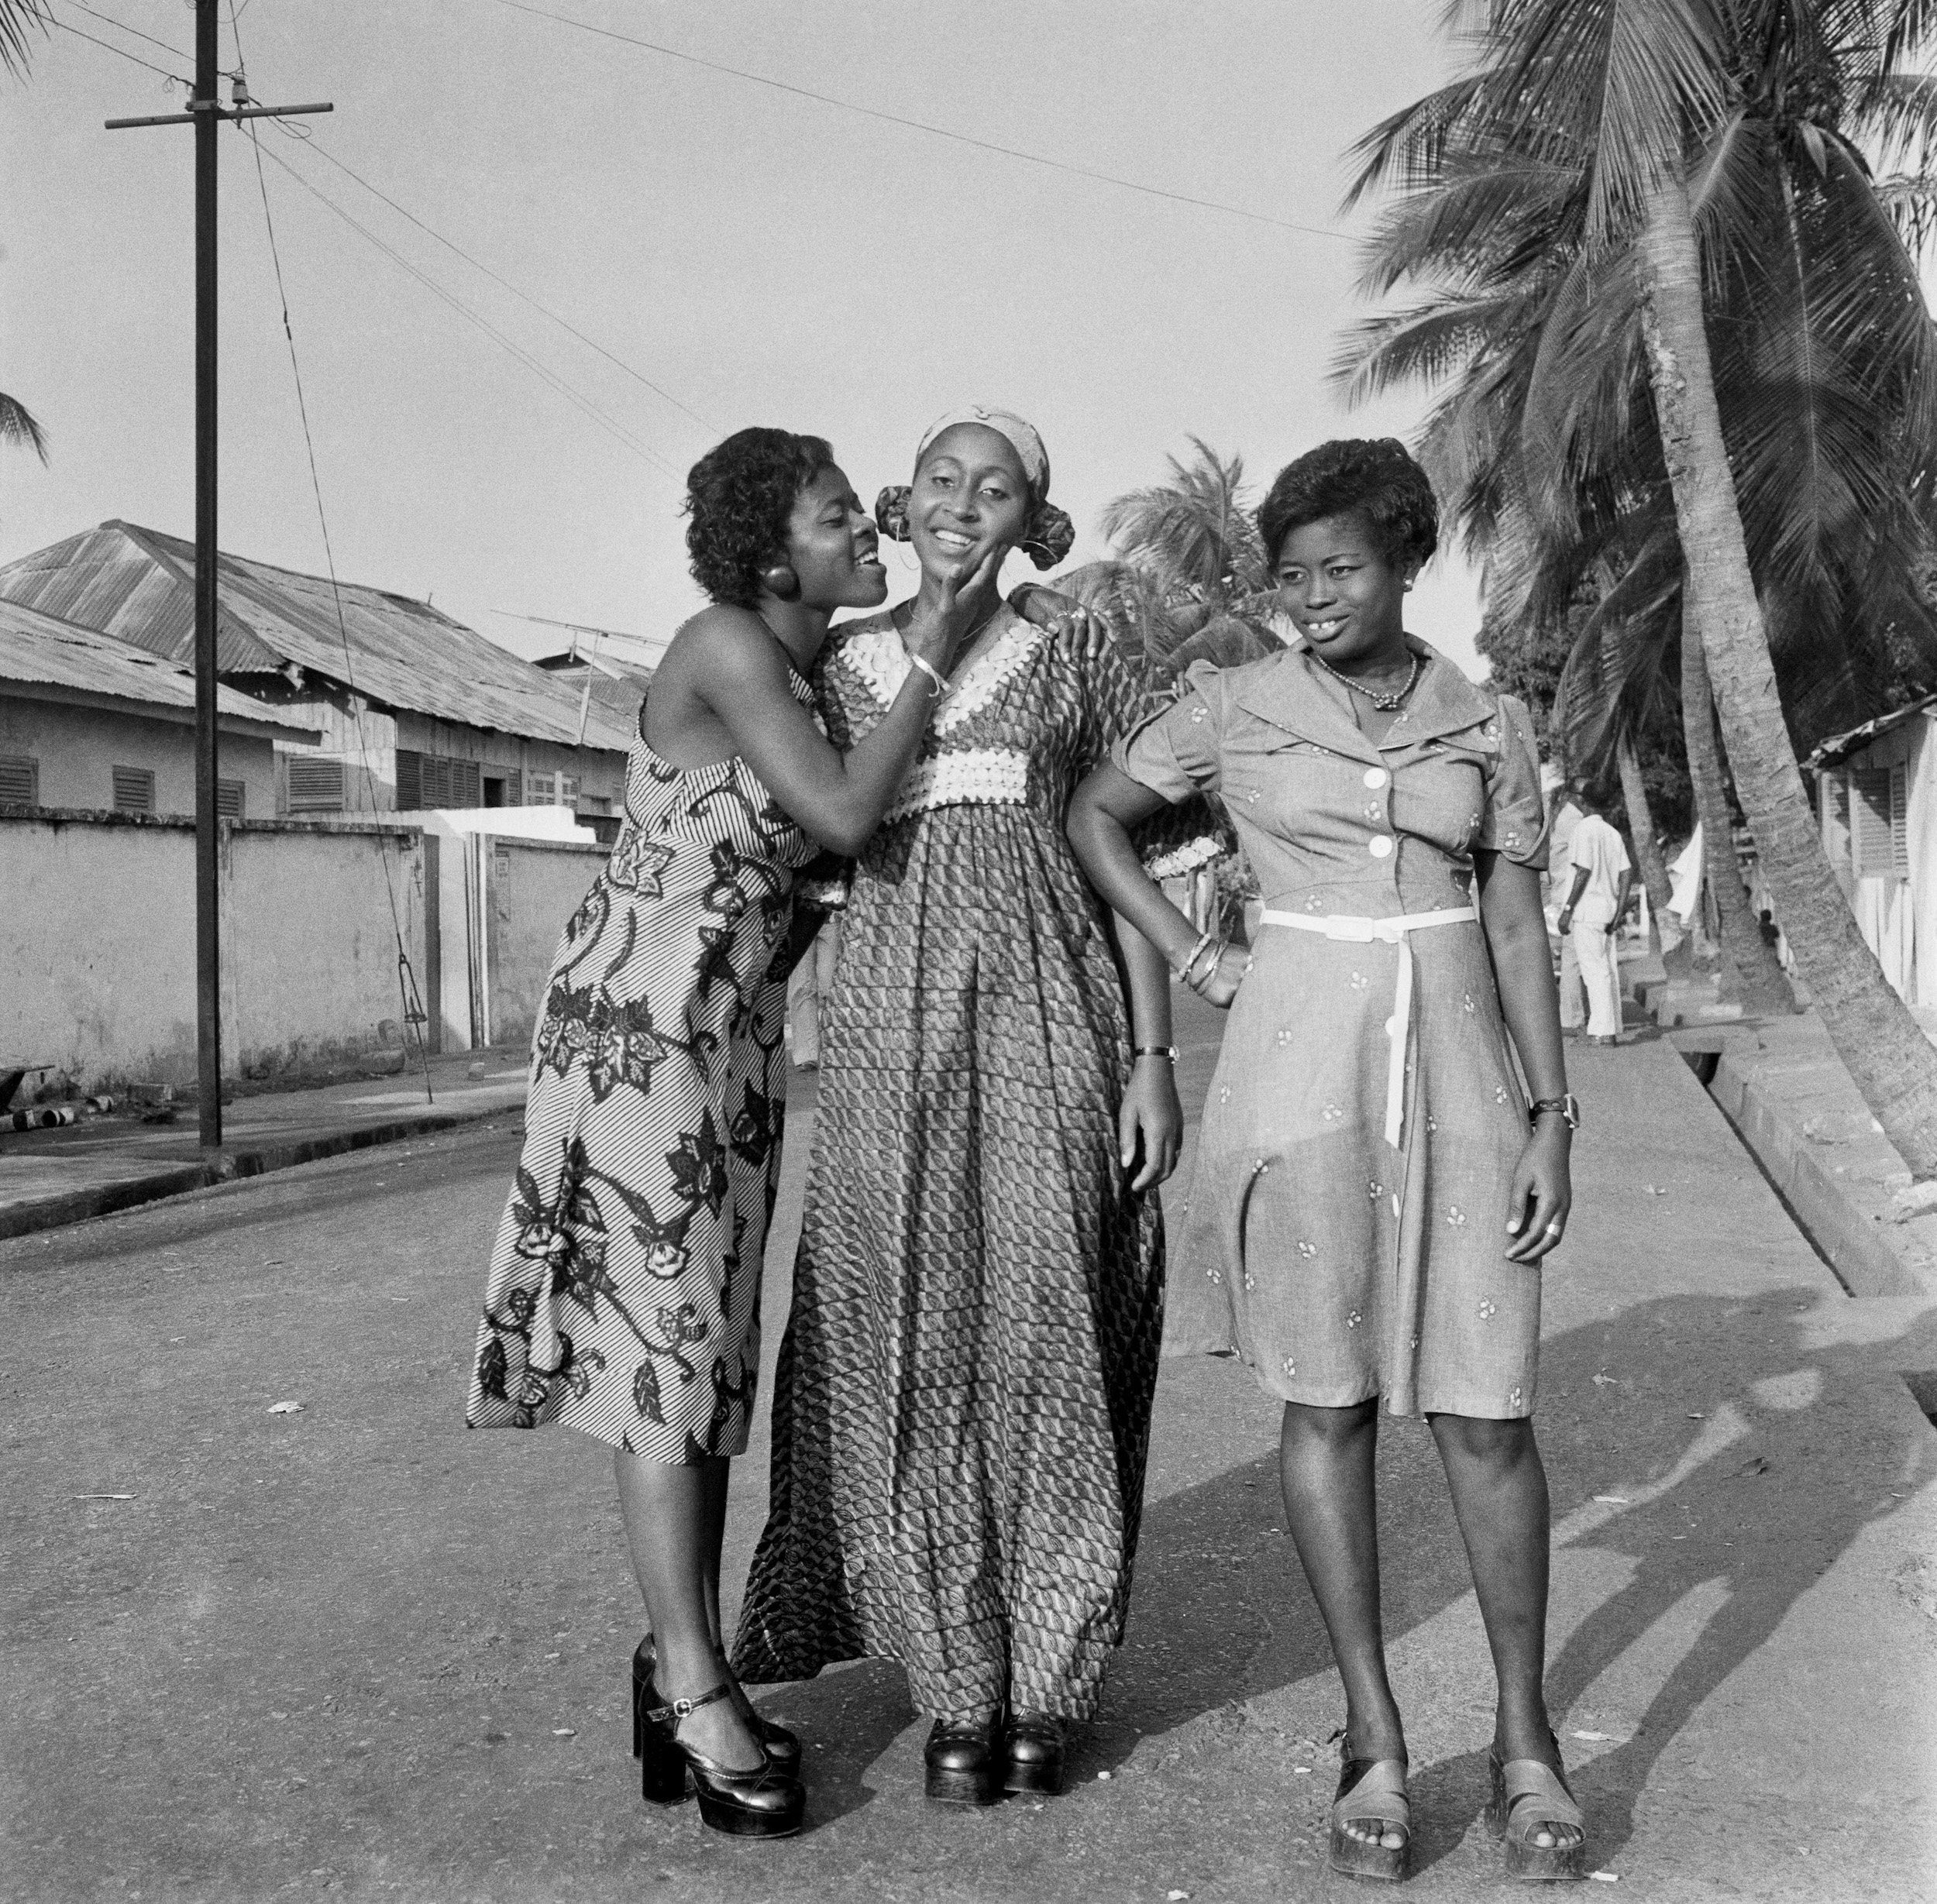 Looking back: James Barnor reflects - 1854 Photography